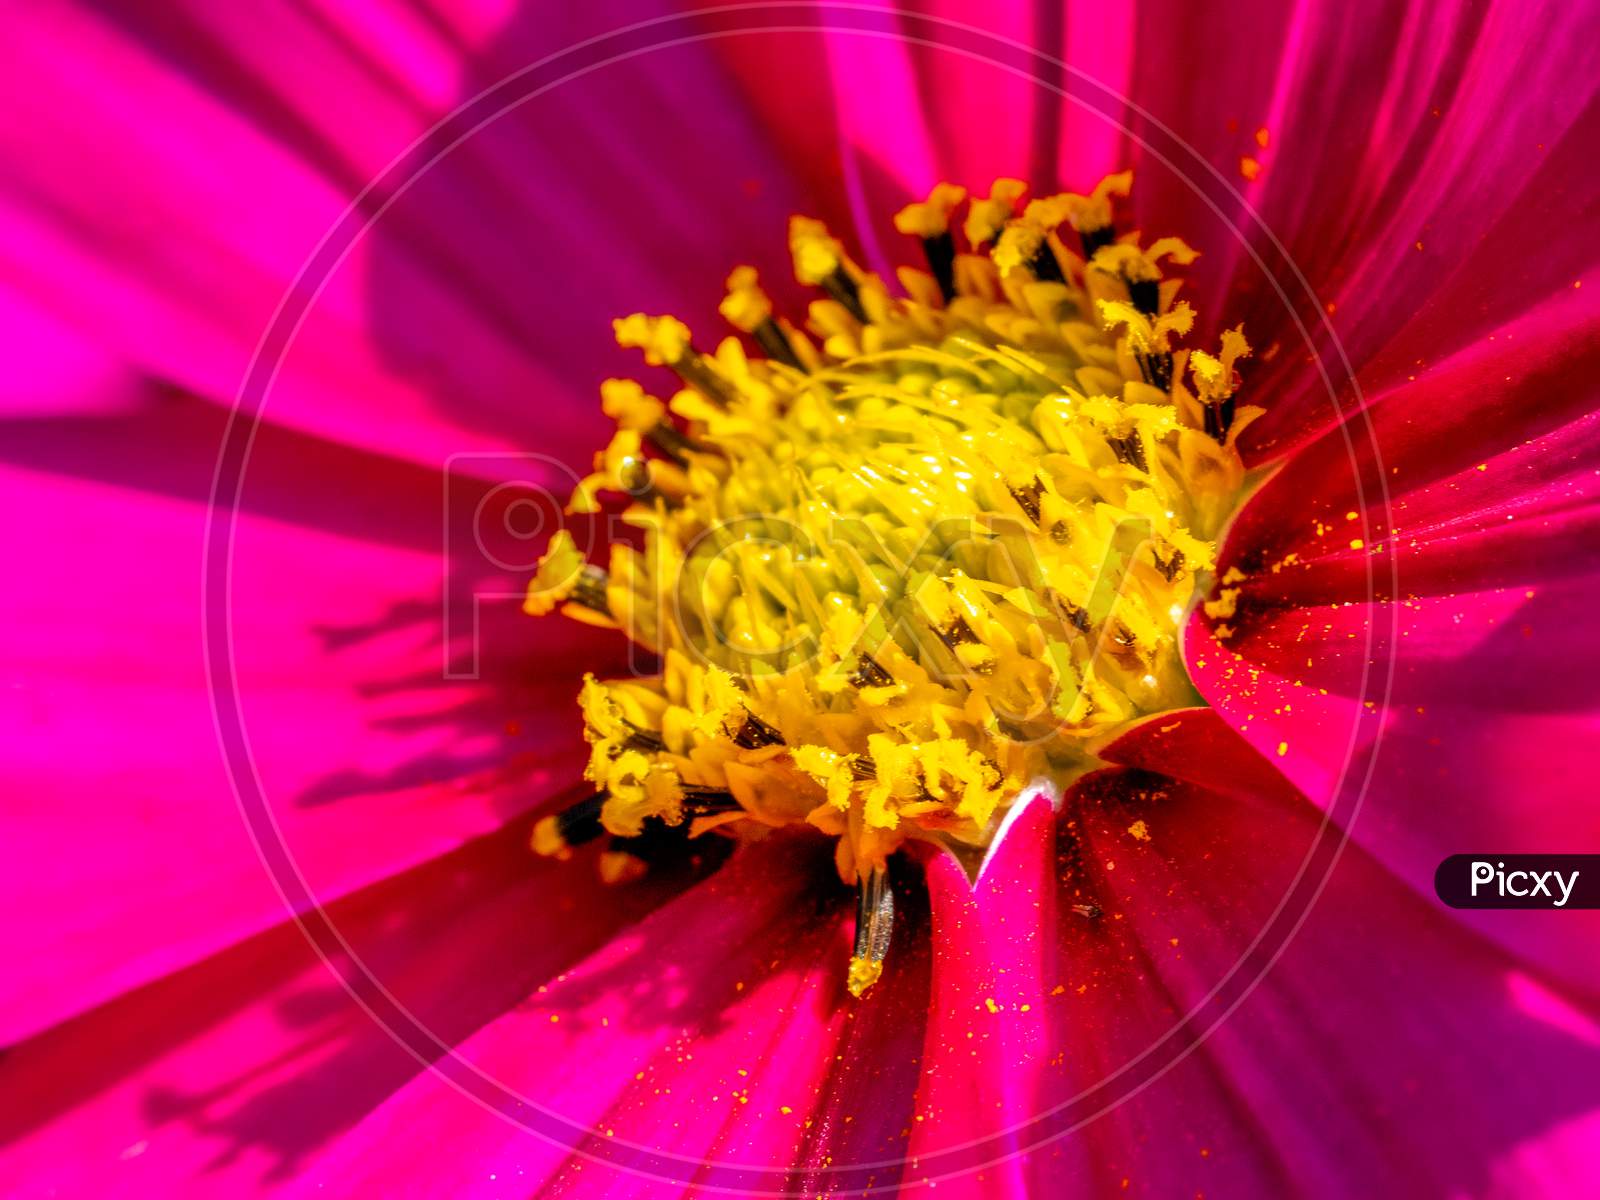 Close-Up View Of A Pink And Yellow Cosmos Flower